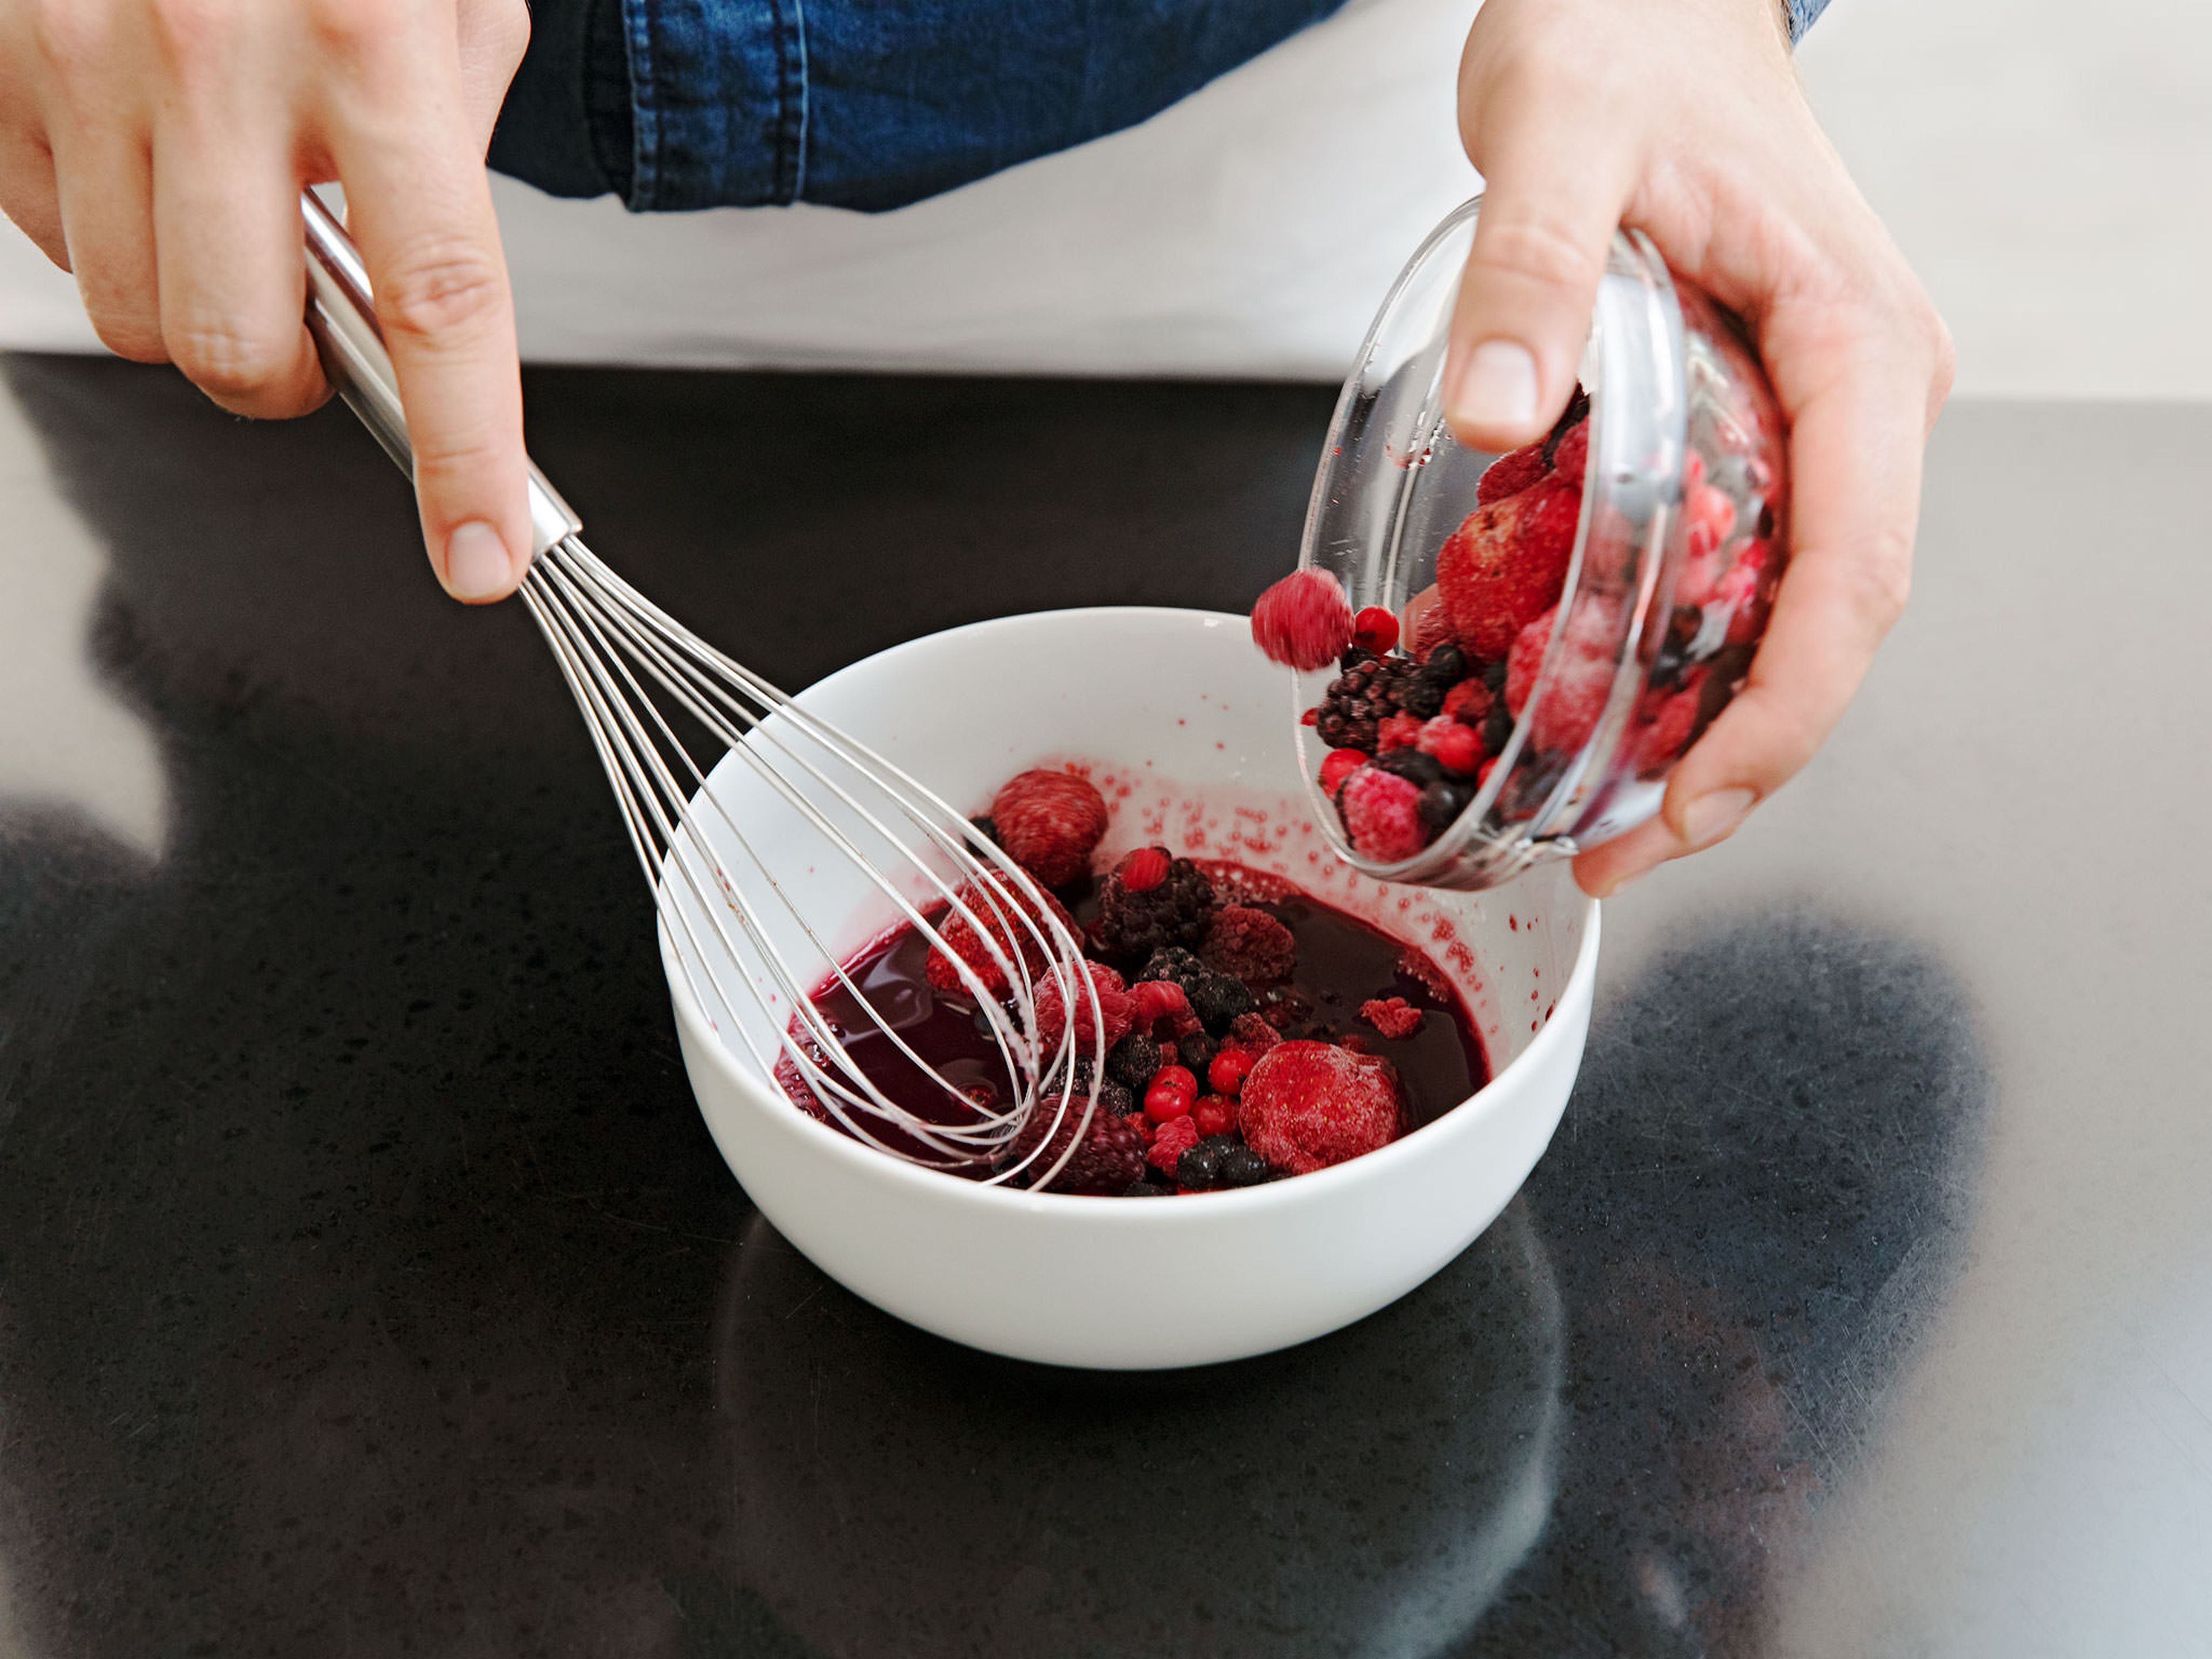 For the berry compote, mix cherry juice, sugar, and starch in another bowl. Add half of the frozen mixed berries.